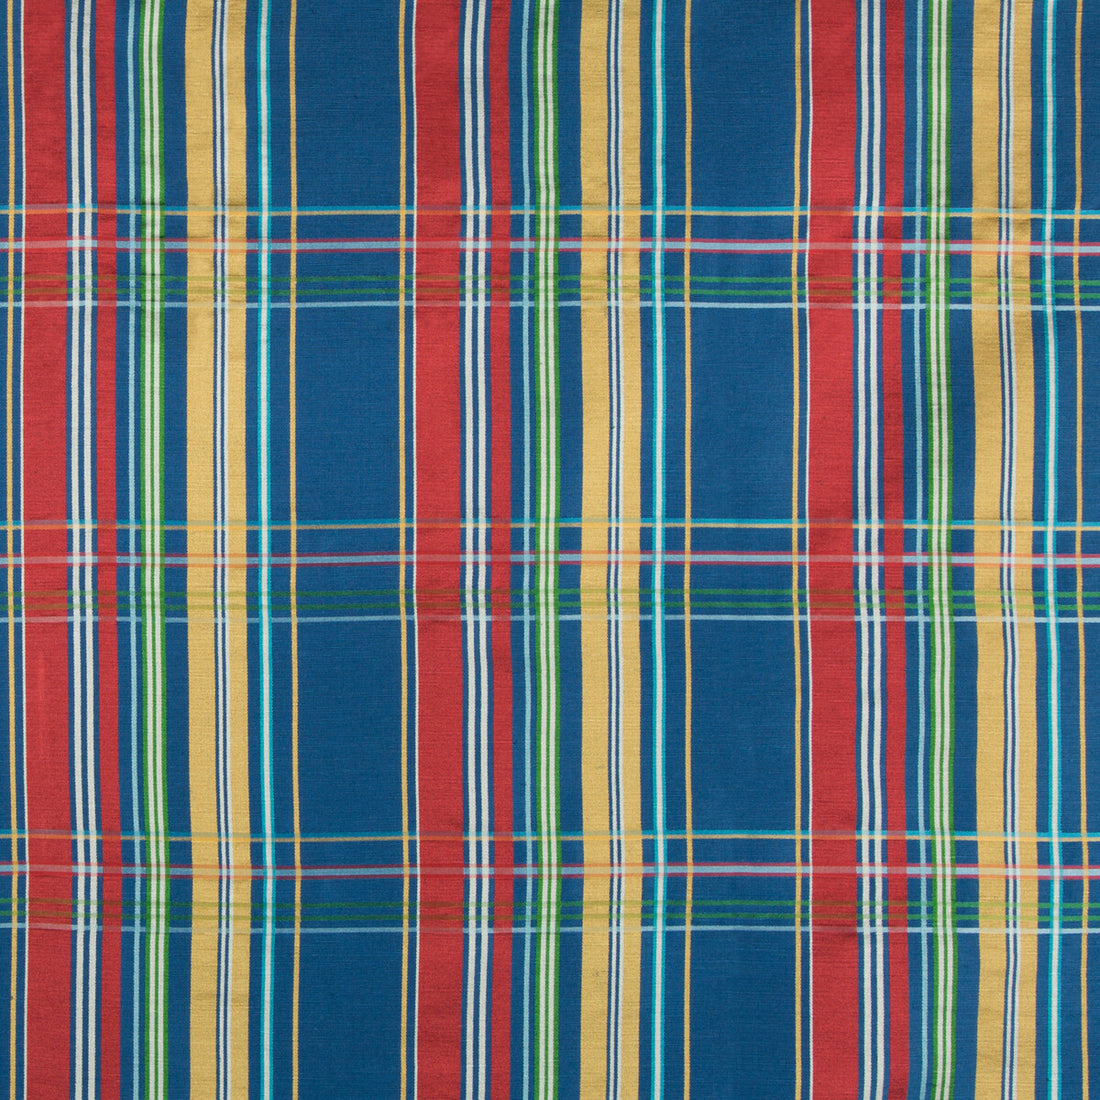 La Comelle Plaid fabric in blue color - pattern 8018108.5.0 - by Brunschwig &amp; Fils in the Baret collection